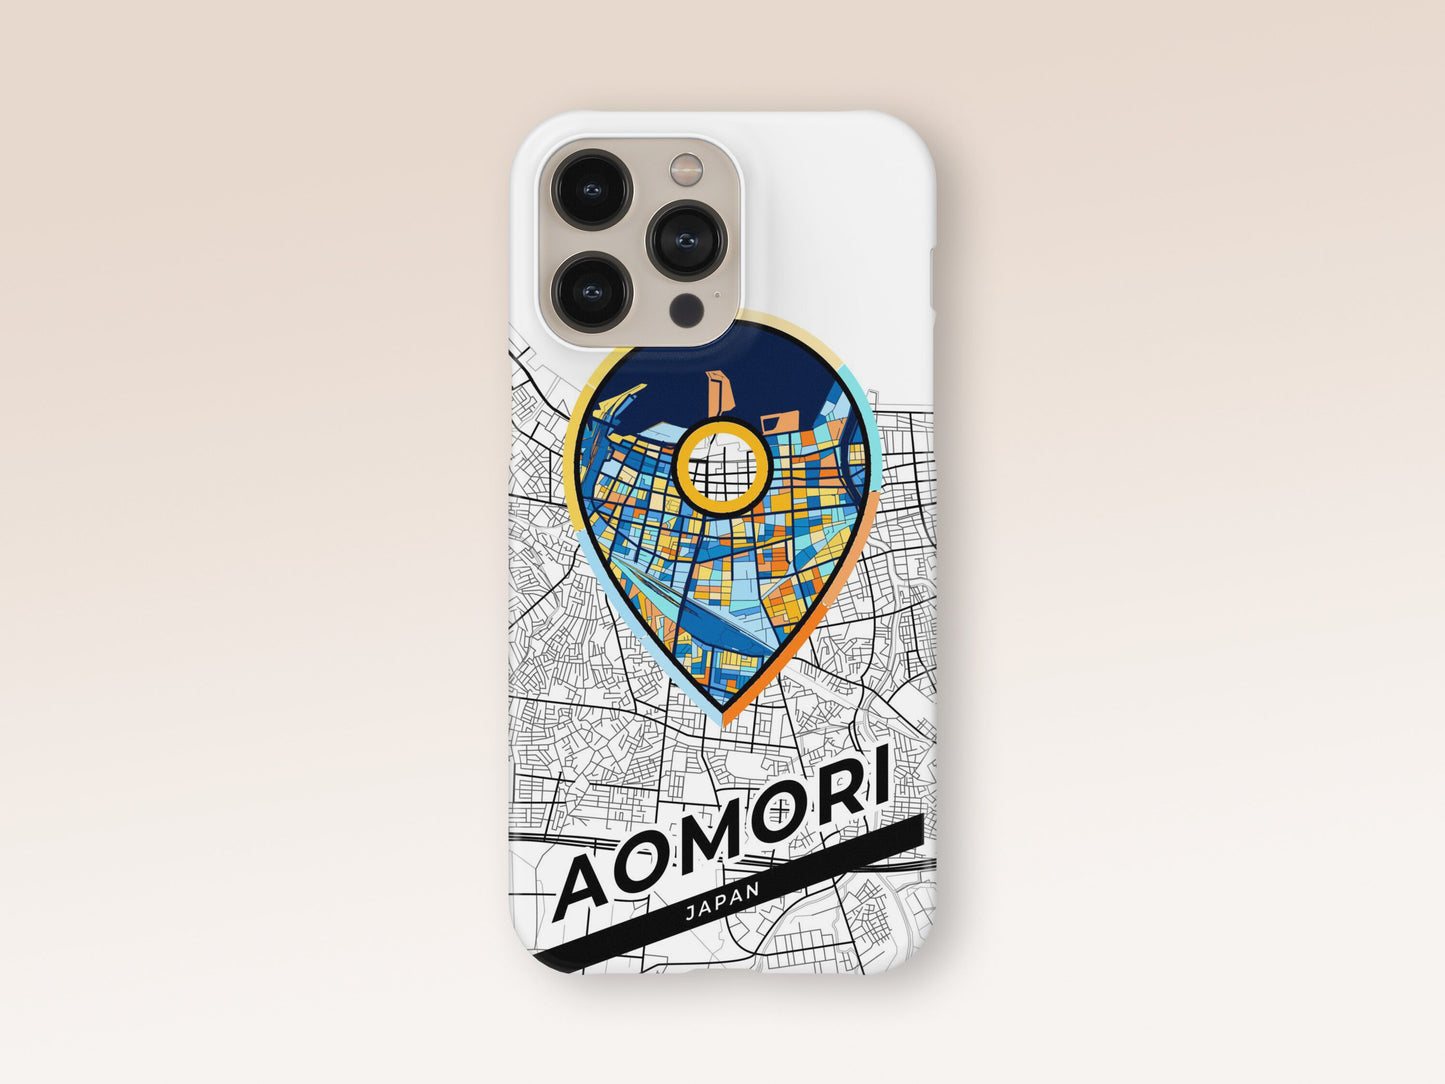 Aomori Japan slim phone case with colorful icon. Birthday, wedding or housewarming gift. Couple match cases. 1